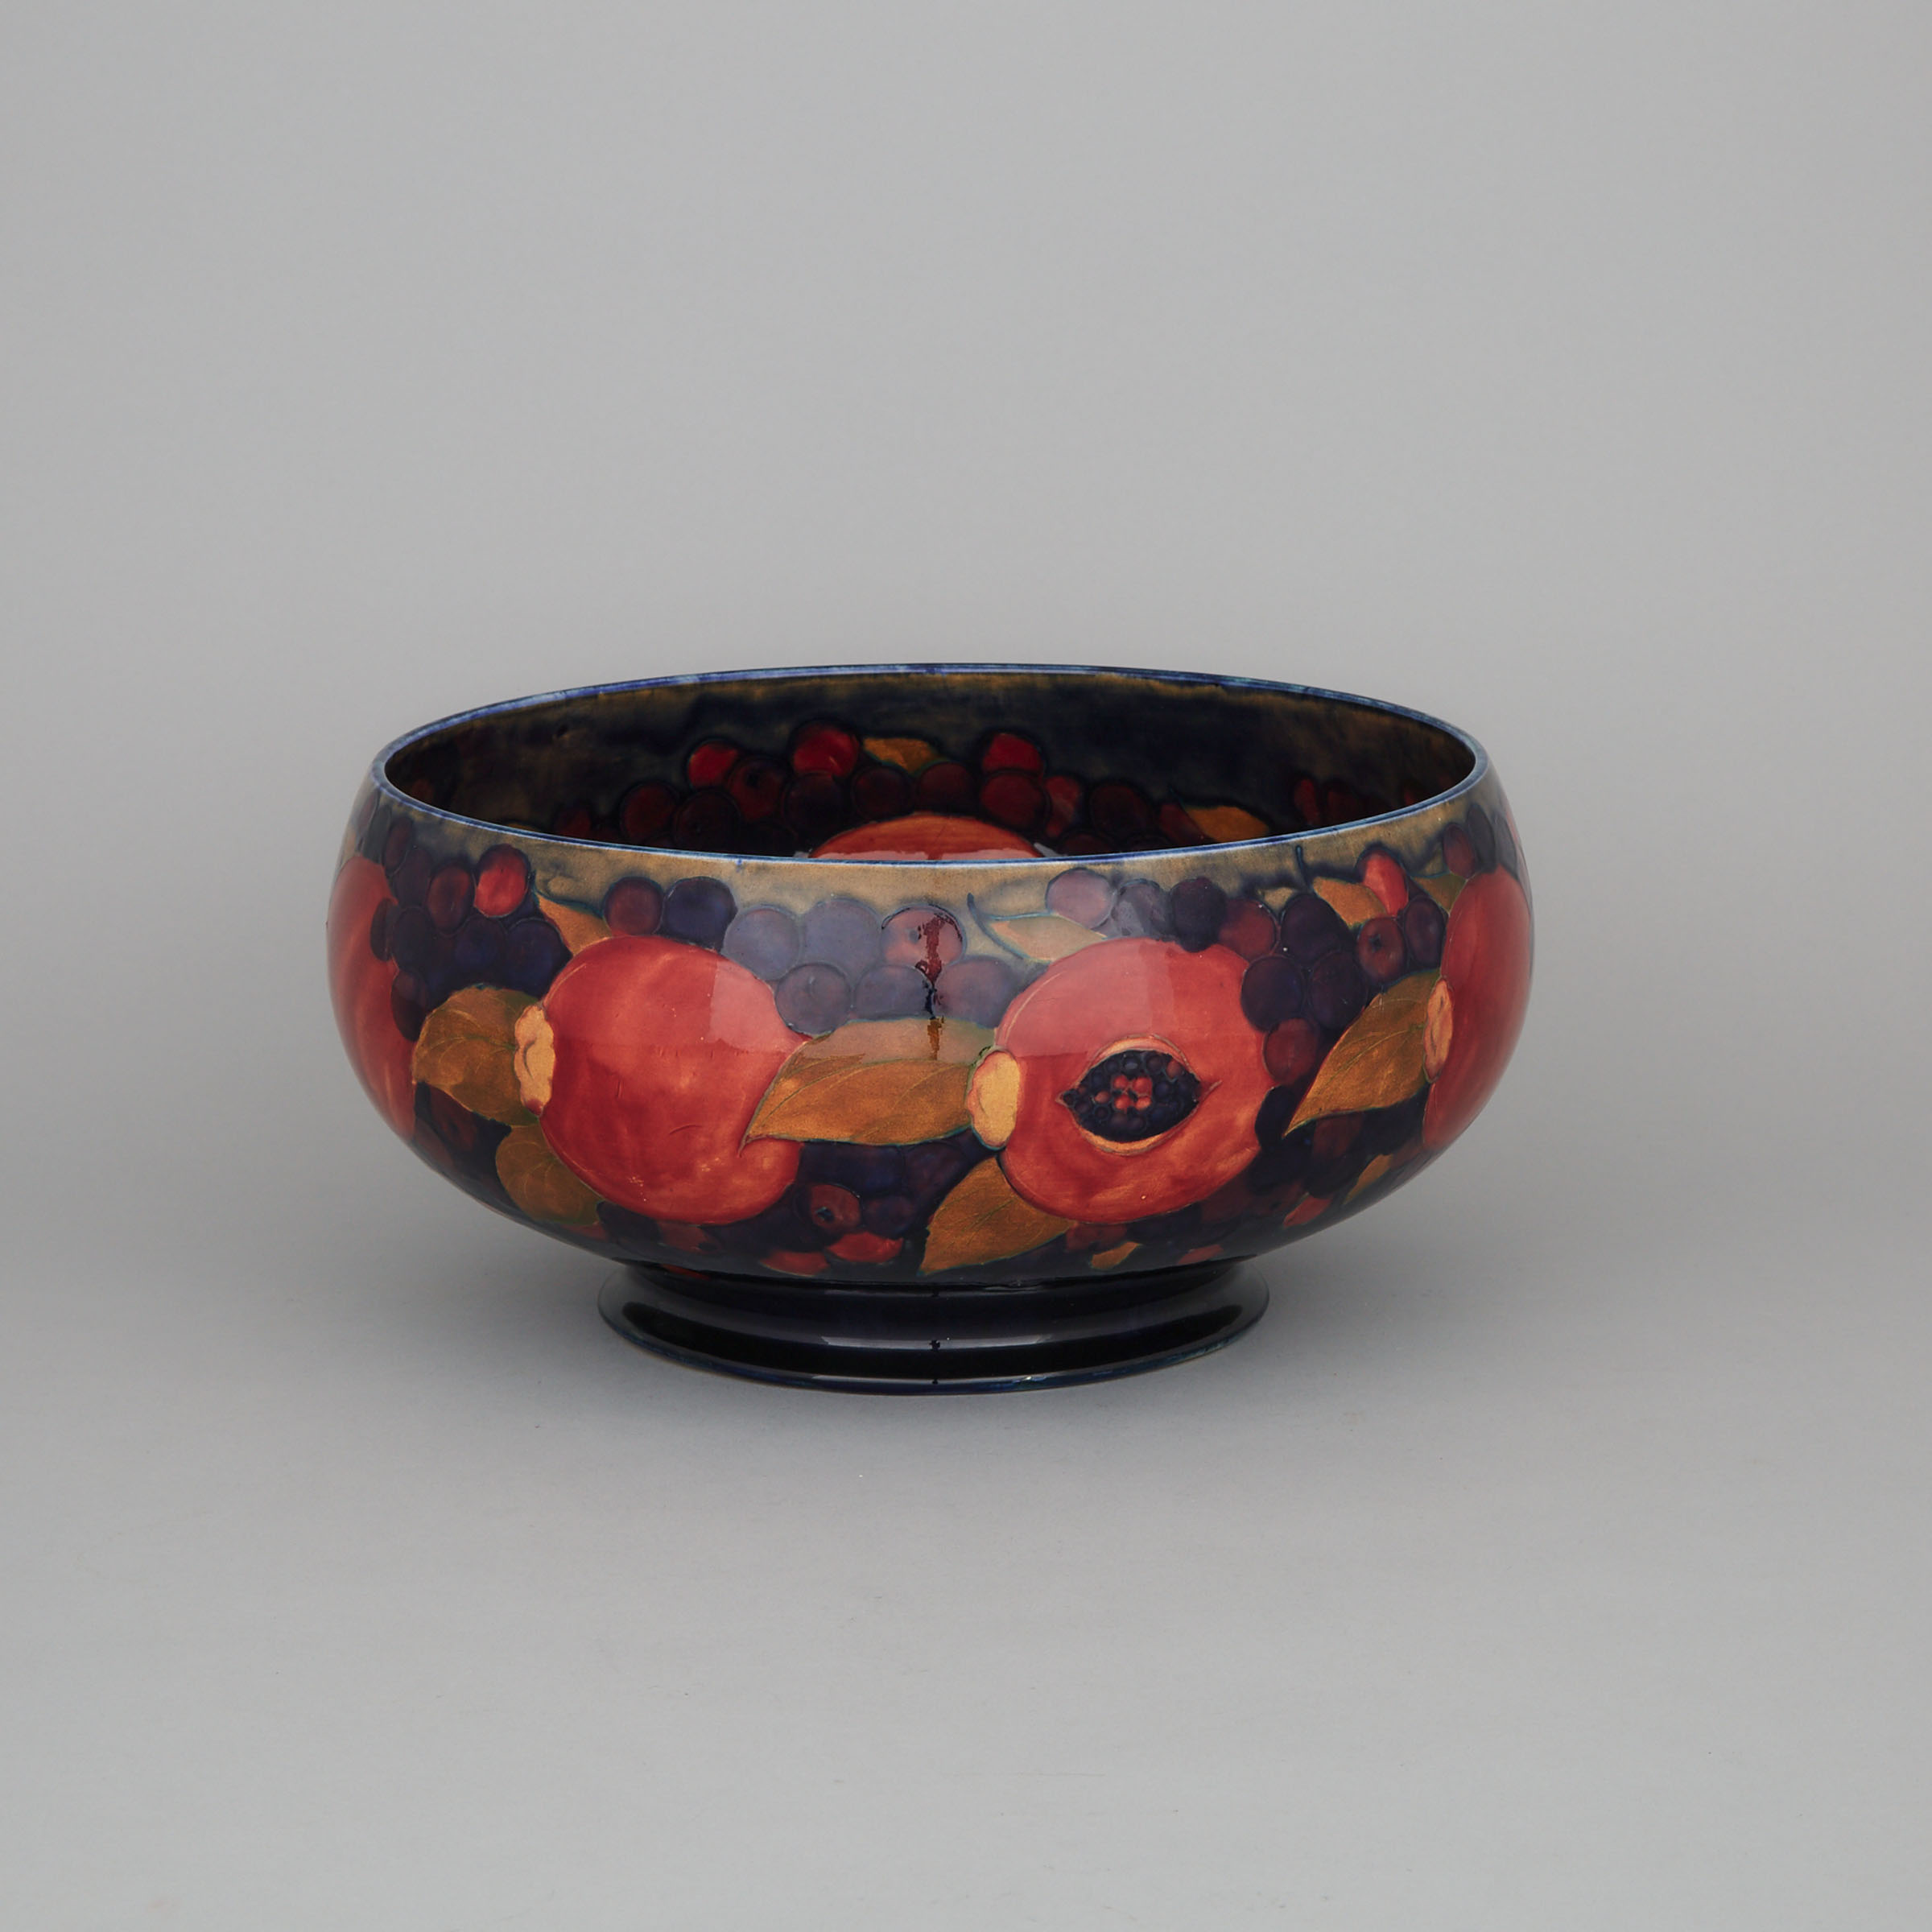 Moorcroft Pomegranate Large Bowl, for the Wembley Exhibition, dated 1924